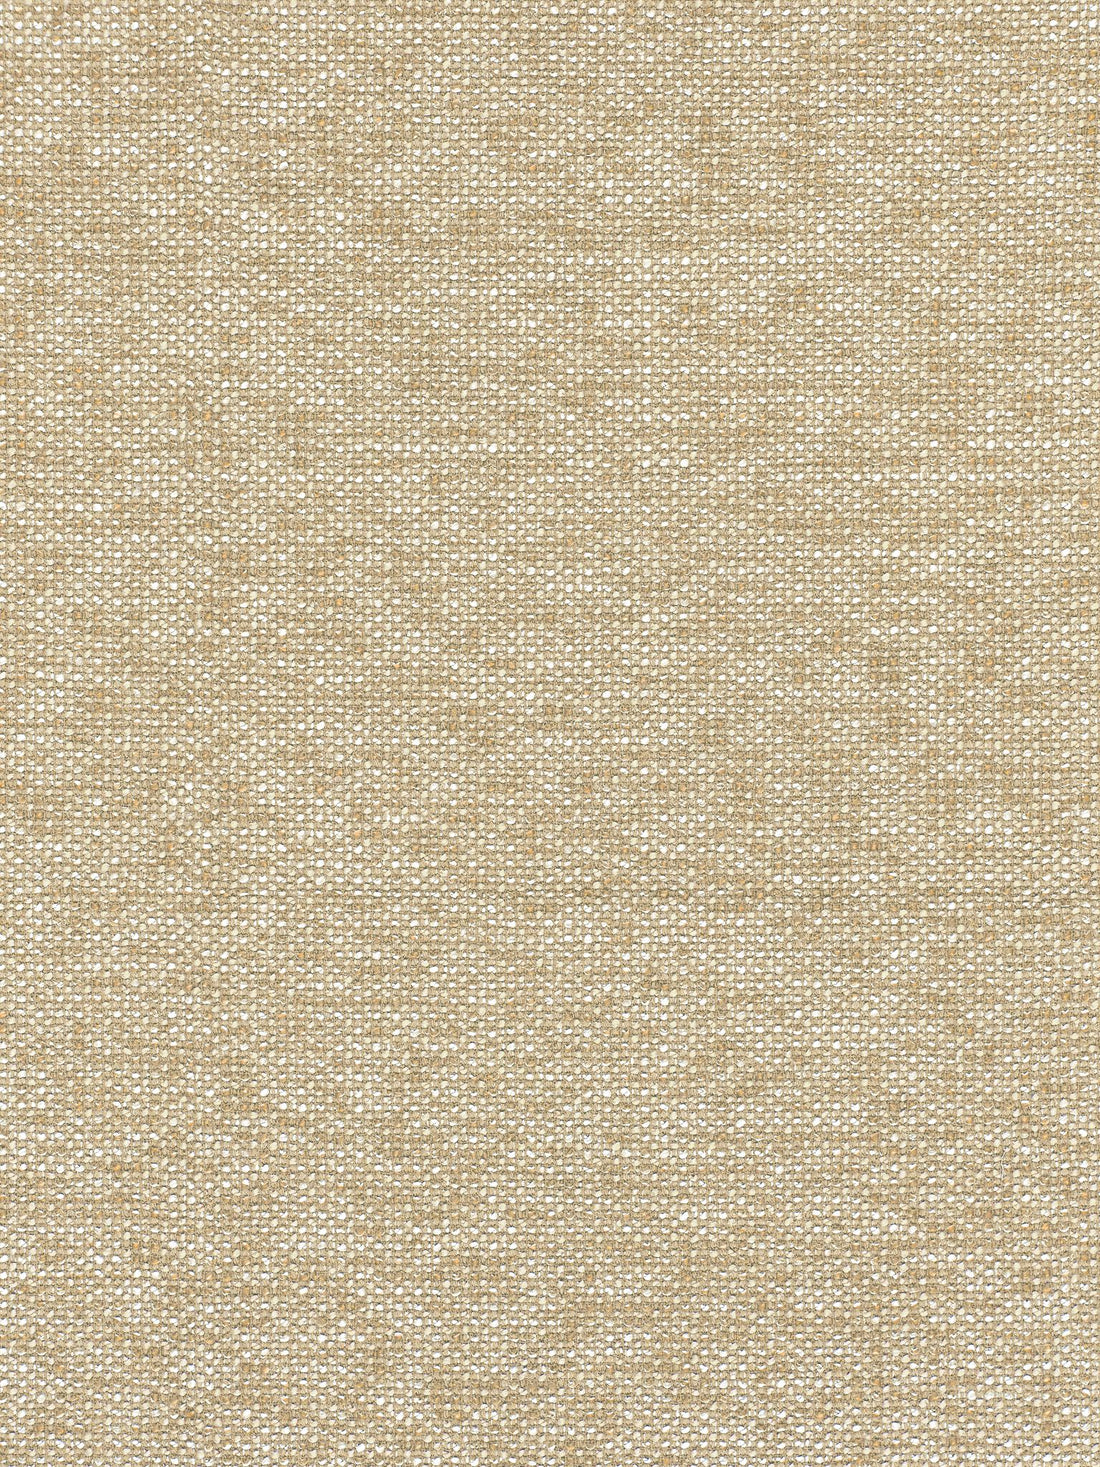 Torrs fabric in sand color - pattern number R7 00040588 - by Scalamandre in the Old World Weavers collection